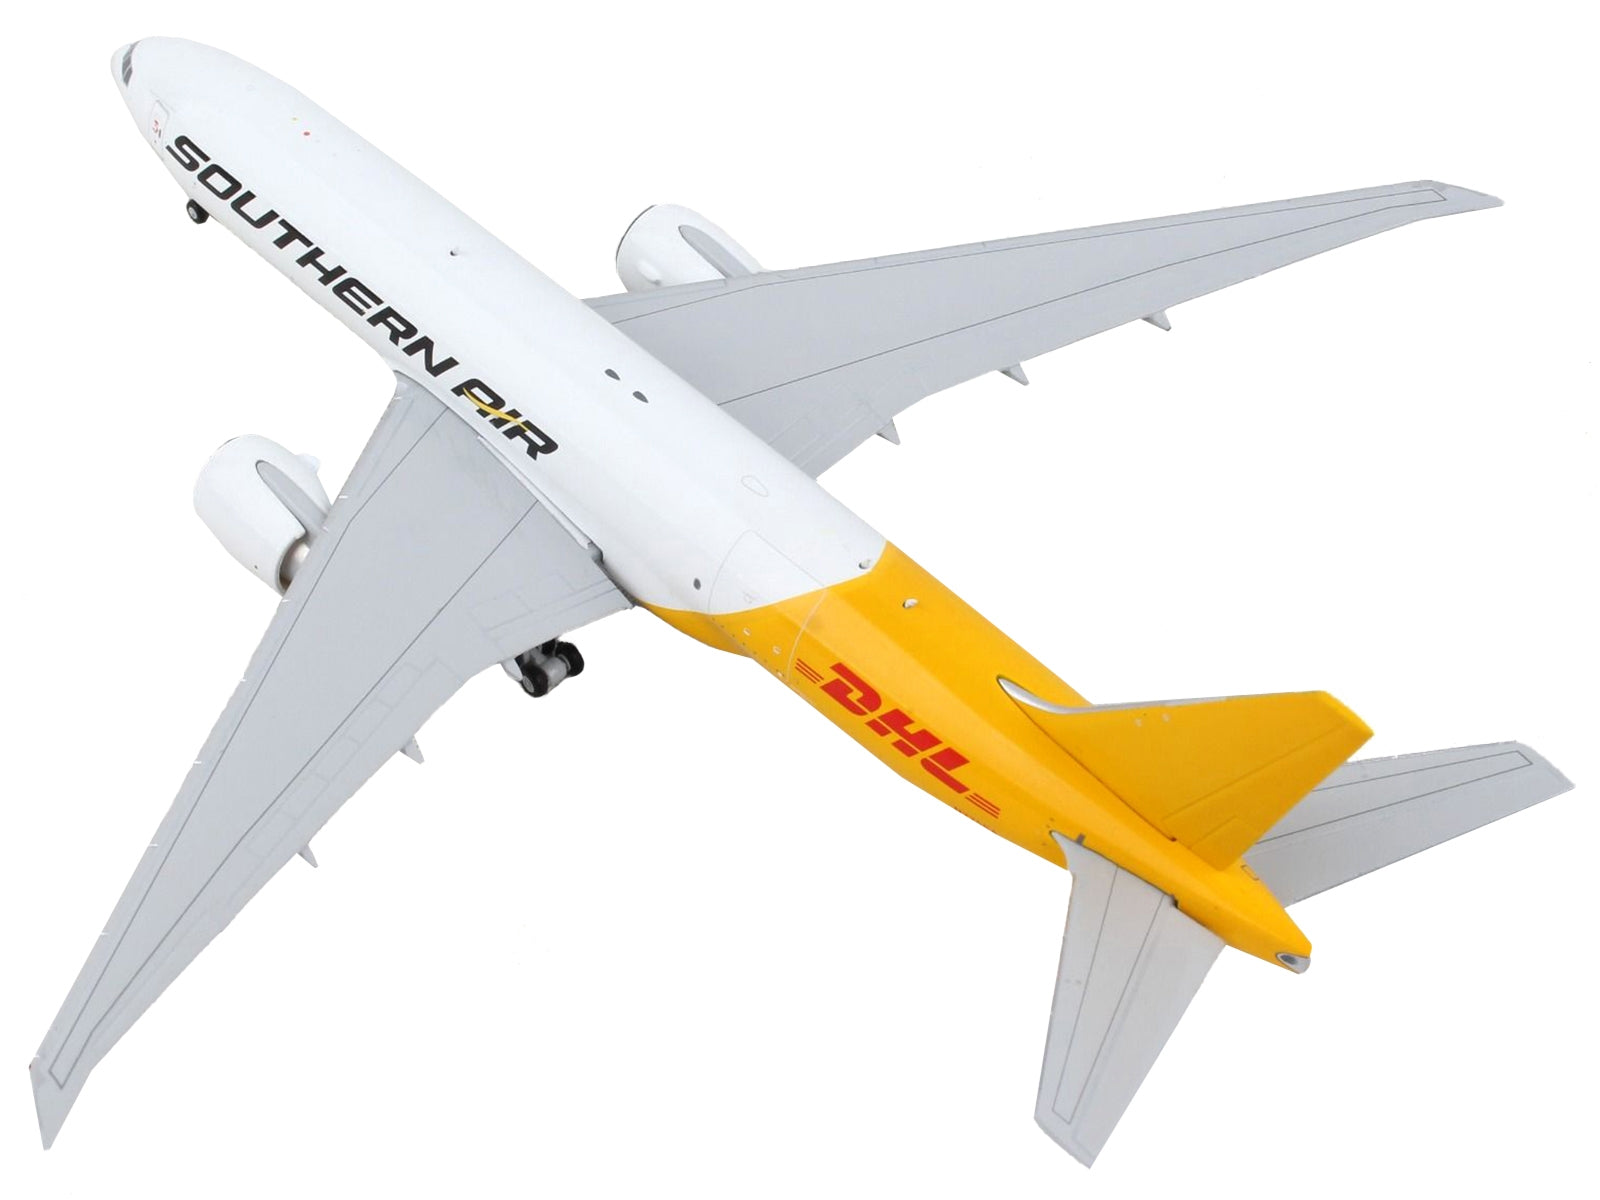 Boeing 777F Commercial Aircraft "Southern Air - DHL" White and Yellow 1/400 Diecast Model Airplane by GeminiJets